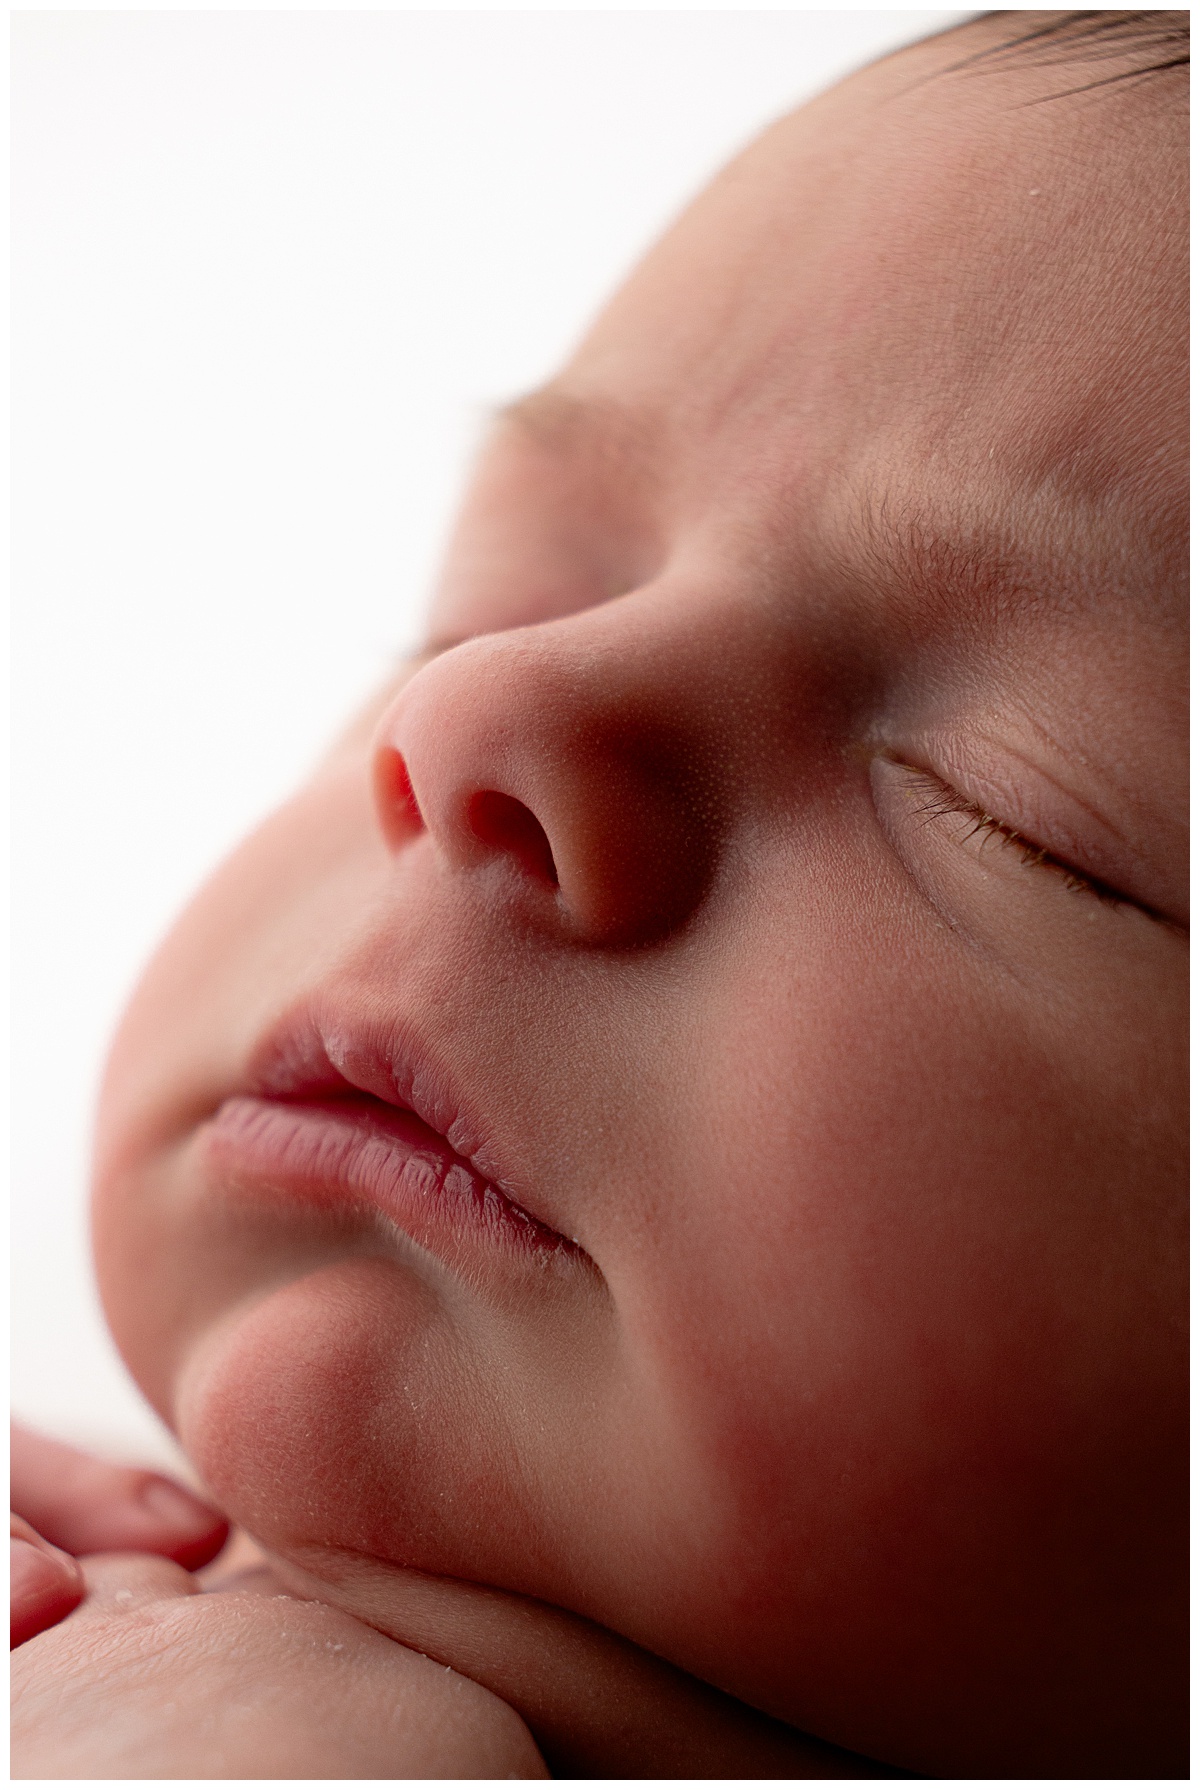 Tiny baby facial features using my must-have Gear for Newborn Photography